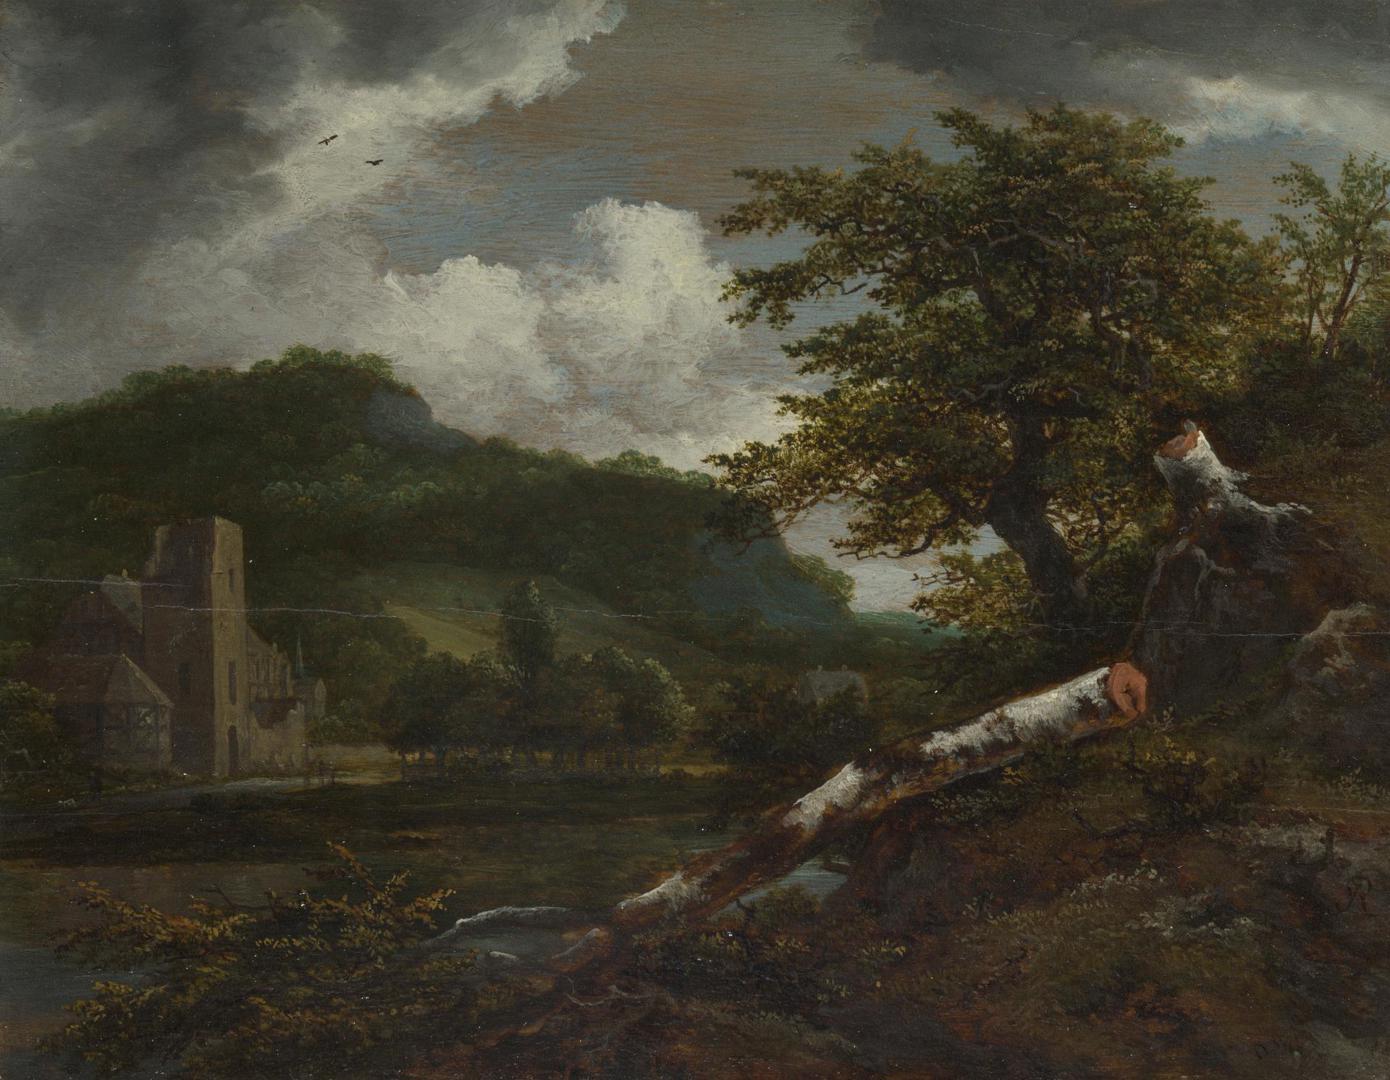 A Landscape with a Ruined Building by Jacob van Ruisdael